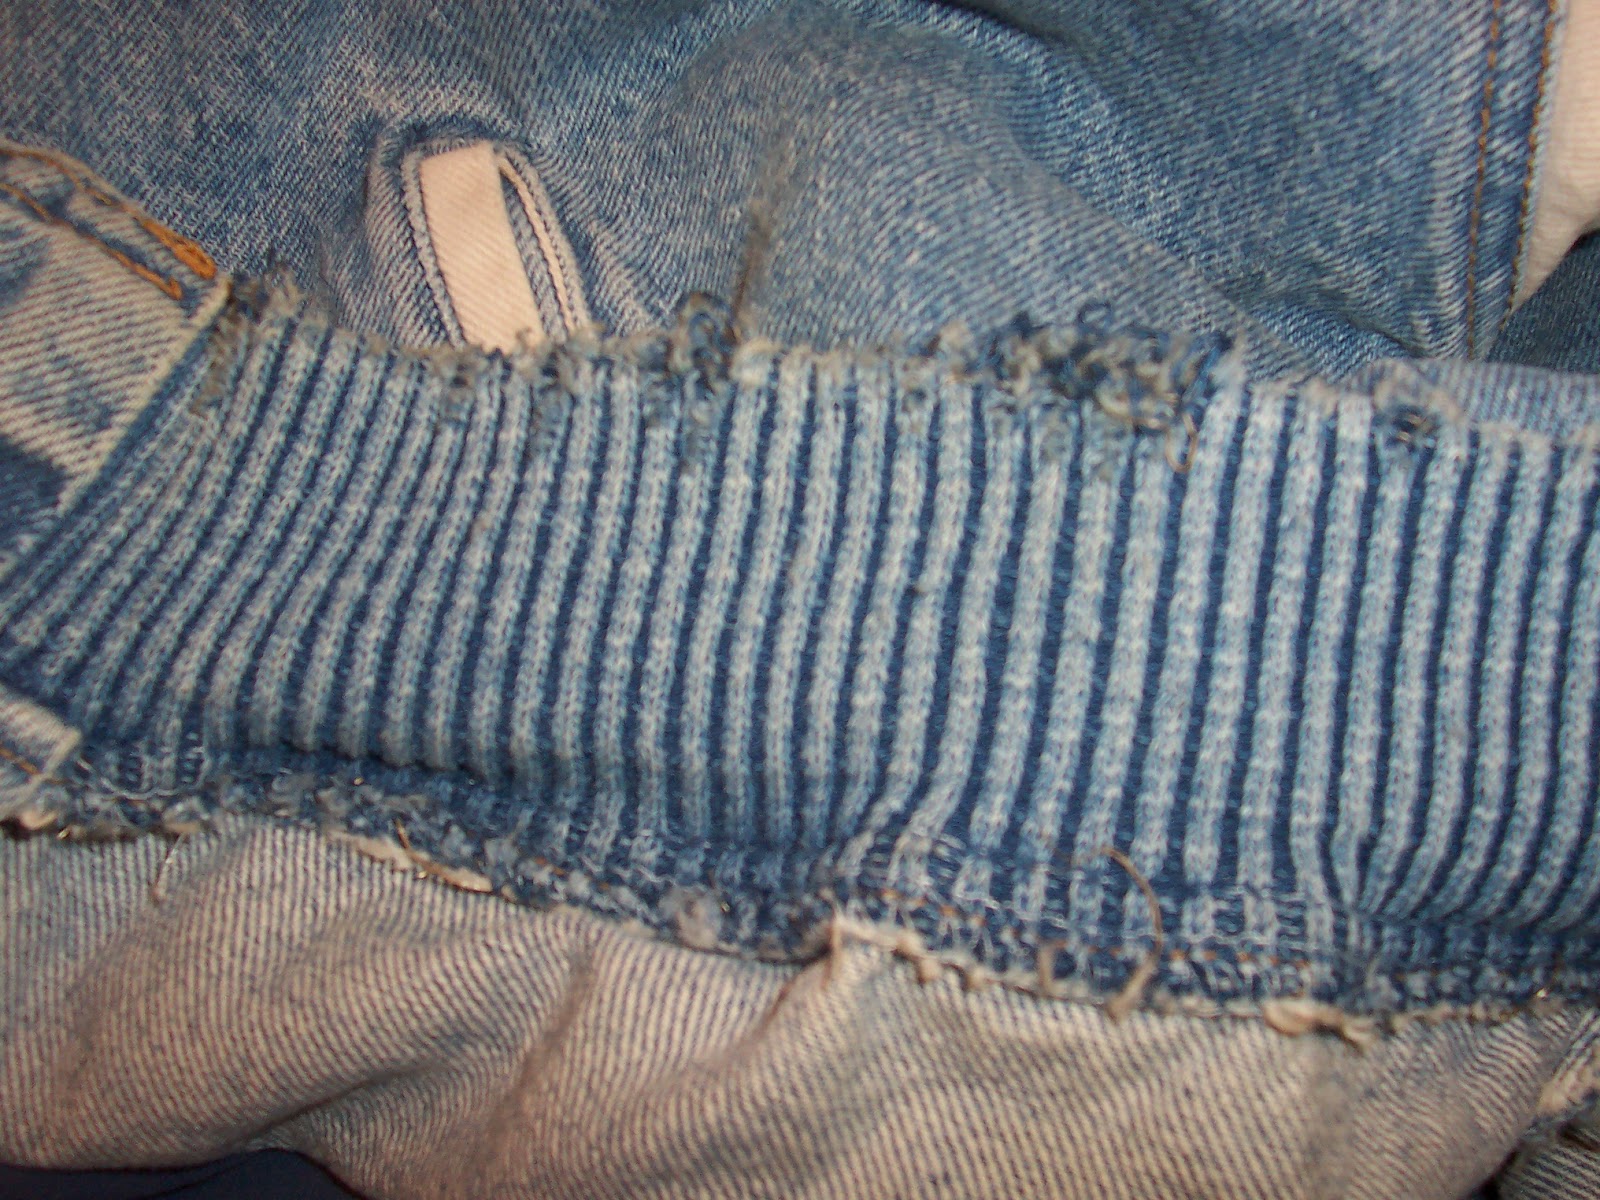 I Garden In Flip Flops: How to Replace Knit Cuffs, Collar, and Waist Band  on a Denim Bommer Jacket